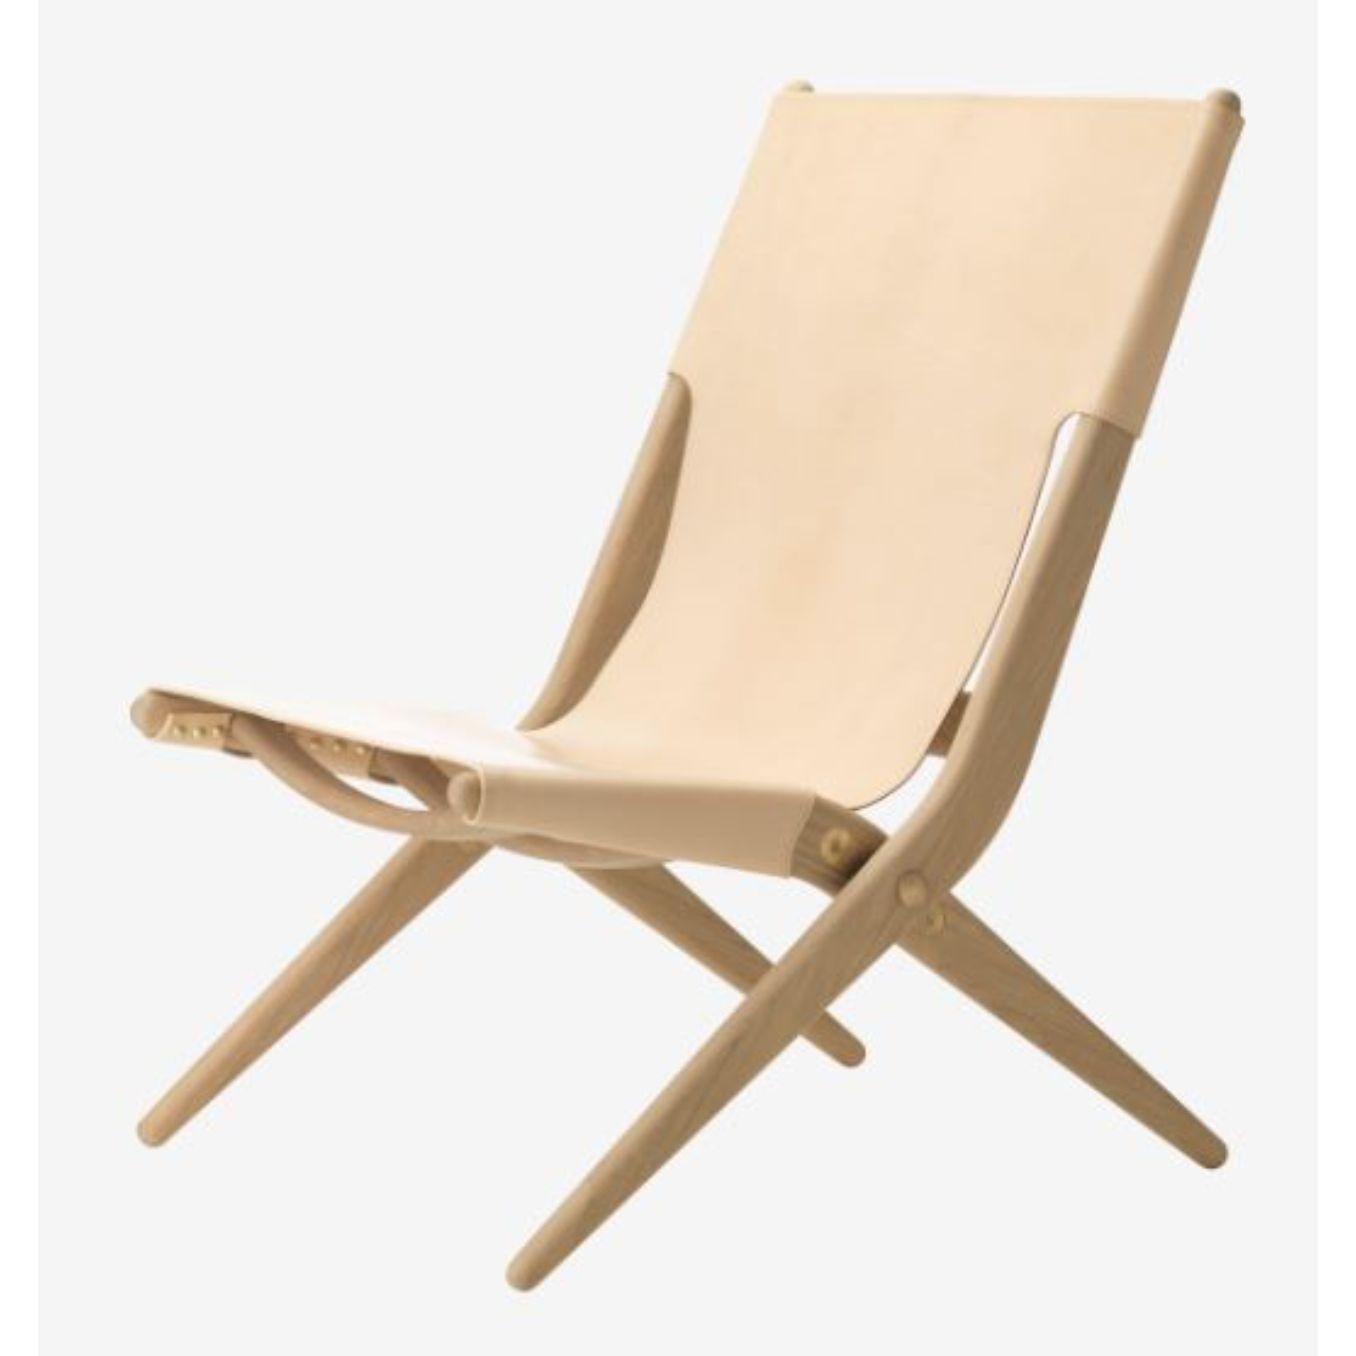 Natural leather saxe chair by Lassen
Dimensions: D 67 x W 60 x H 84 cm 
Materials: Leather, wood, soap treated oak
Also available in different colors and materials. 
Weight: 13 Kg

Mogens Lassen was perceived as ‘the naughty boy in class’, but